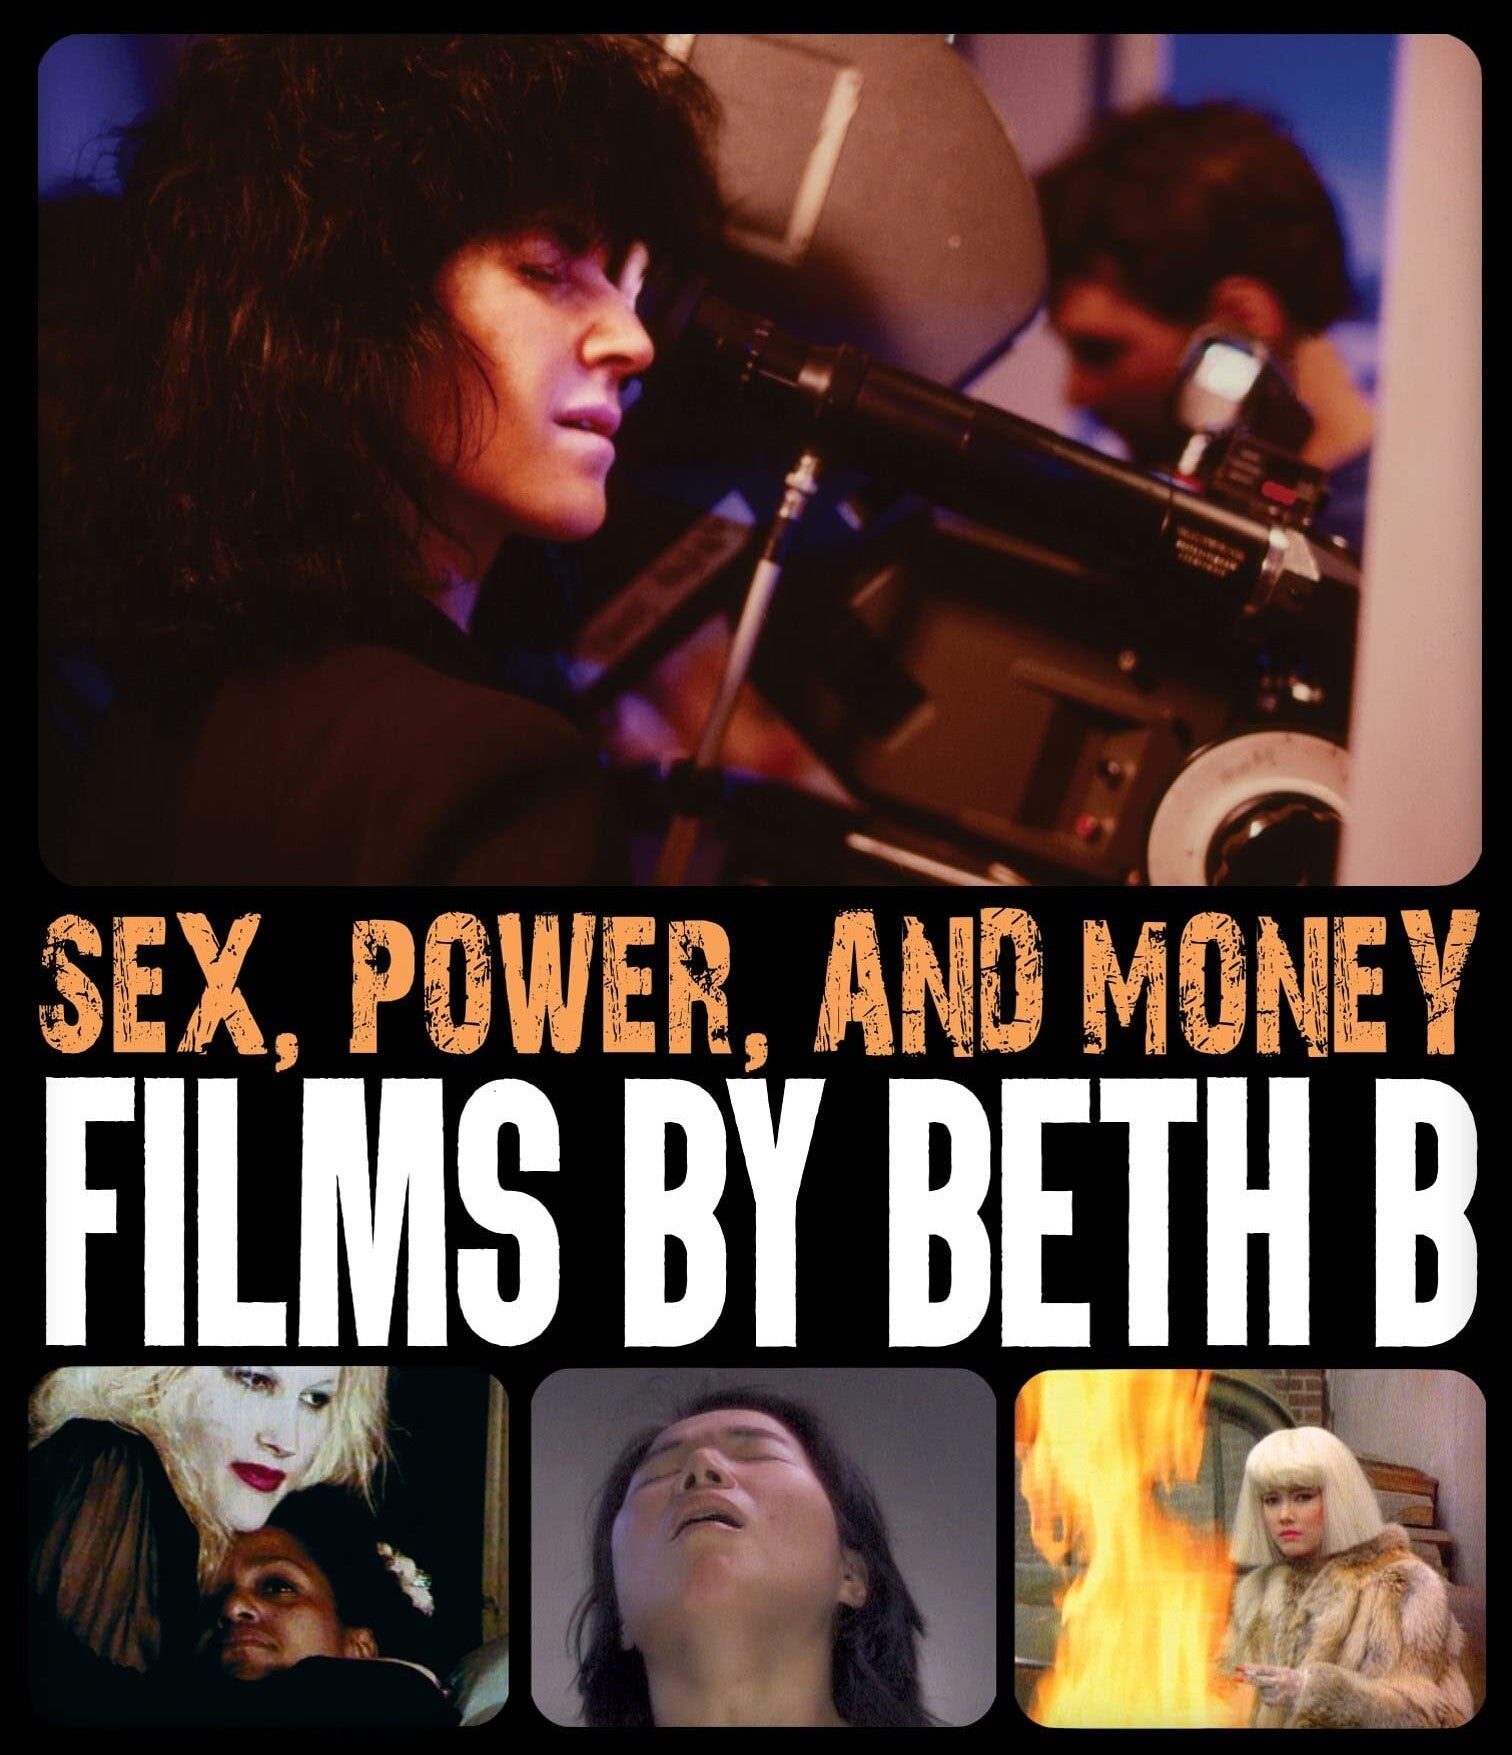 SEX, POWER AND MONEY FILMS BY BETH B BLU-RAY pic